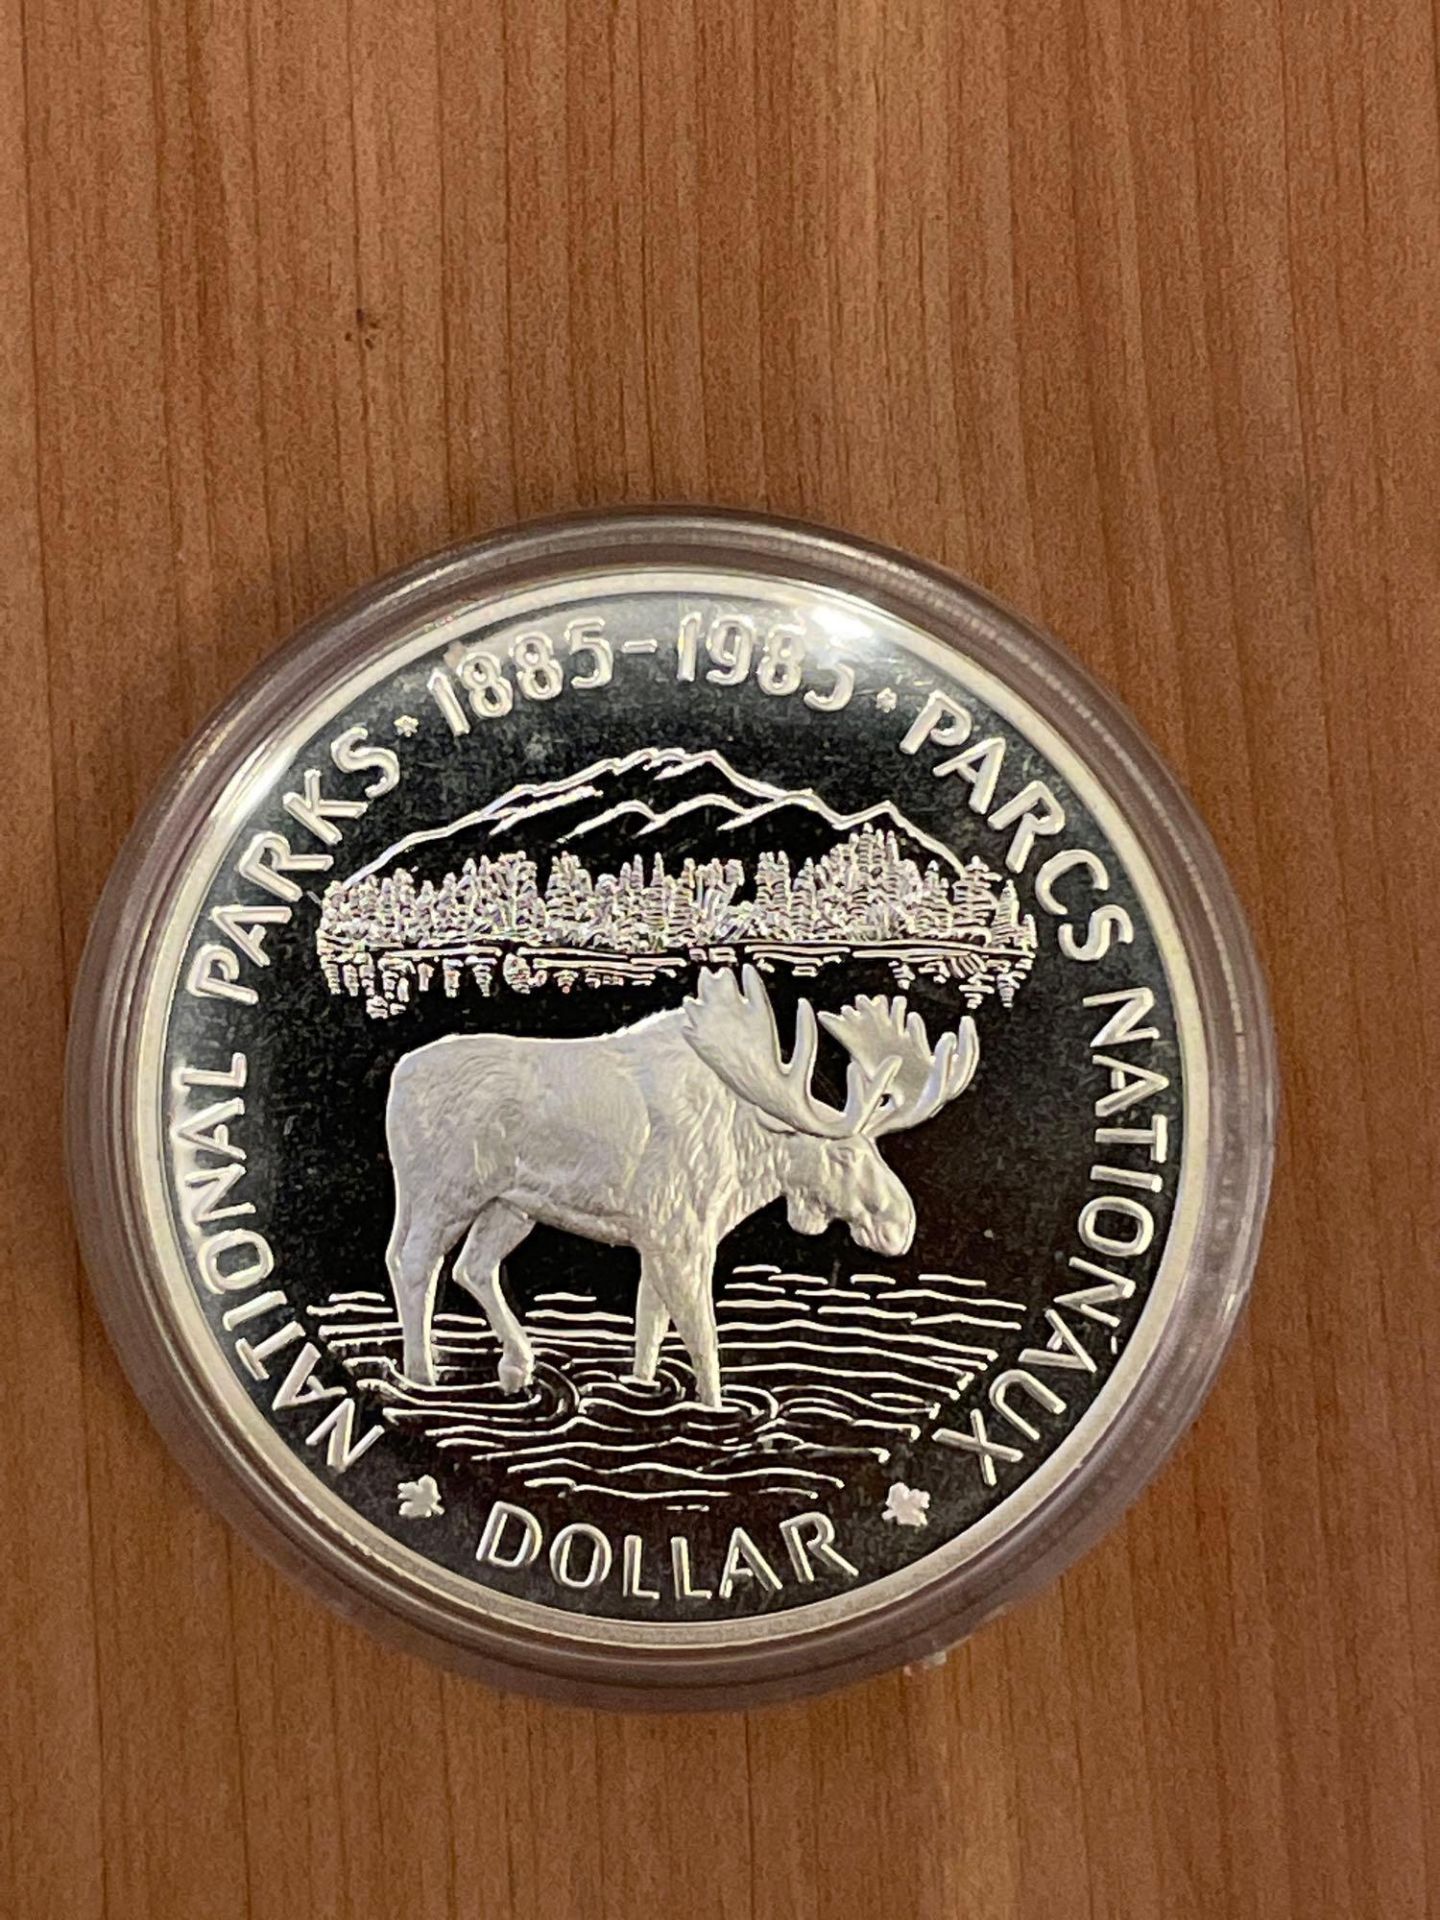 1985 Canadian National Parks .500 Silver Proof Dollar - Image 6 of 6